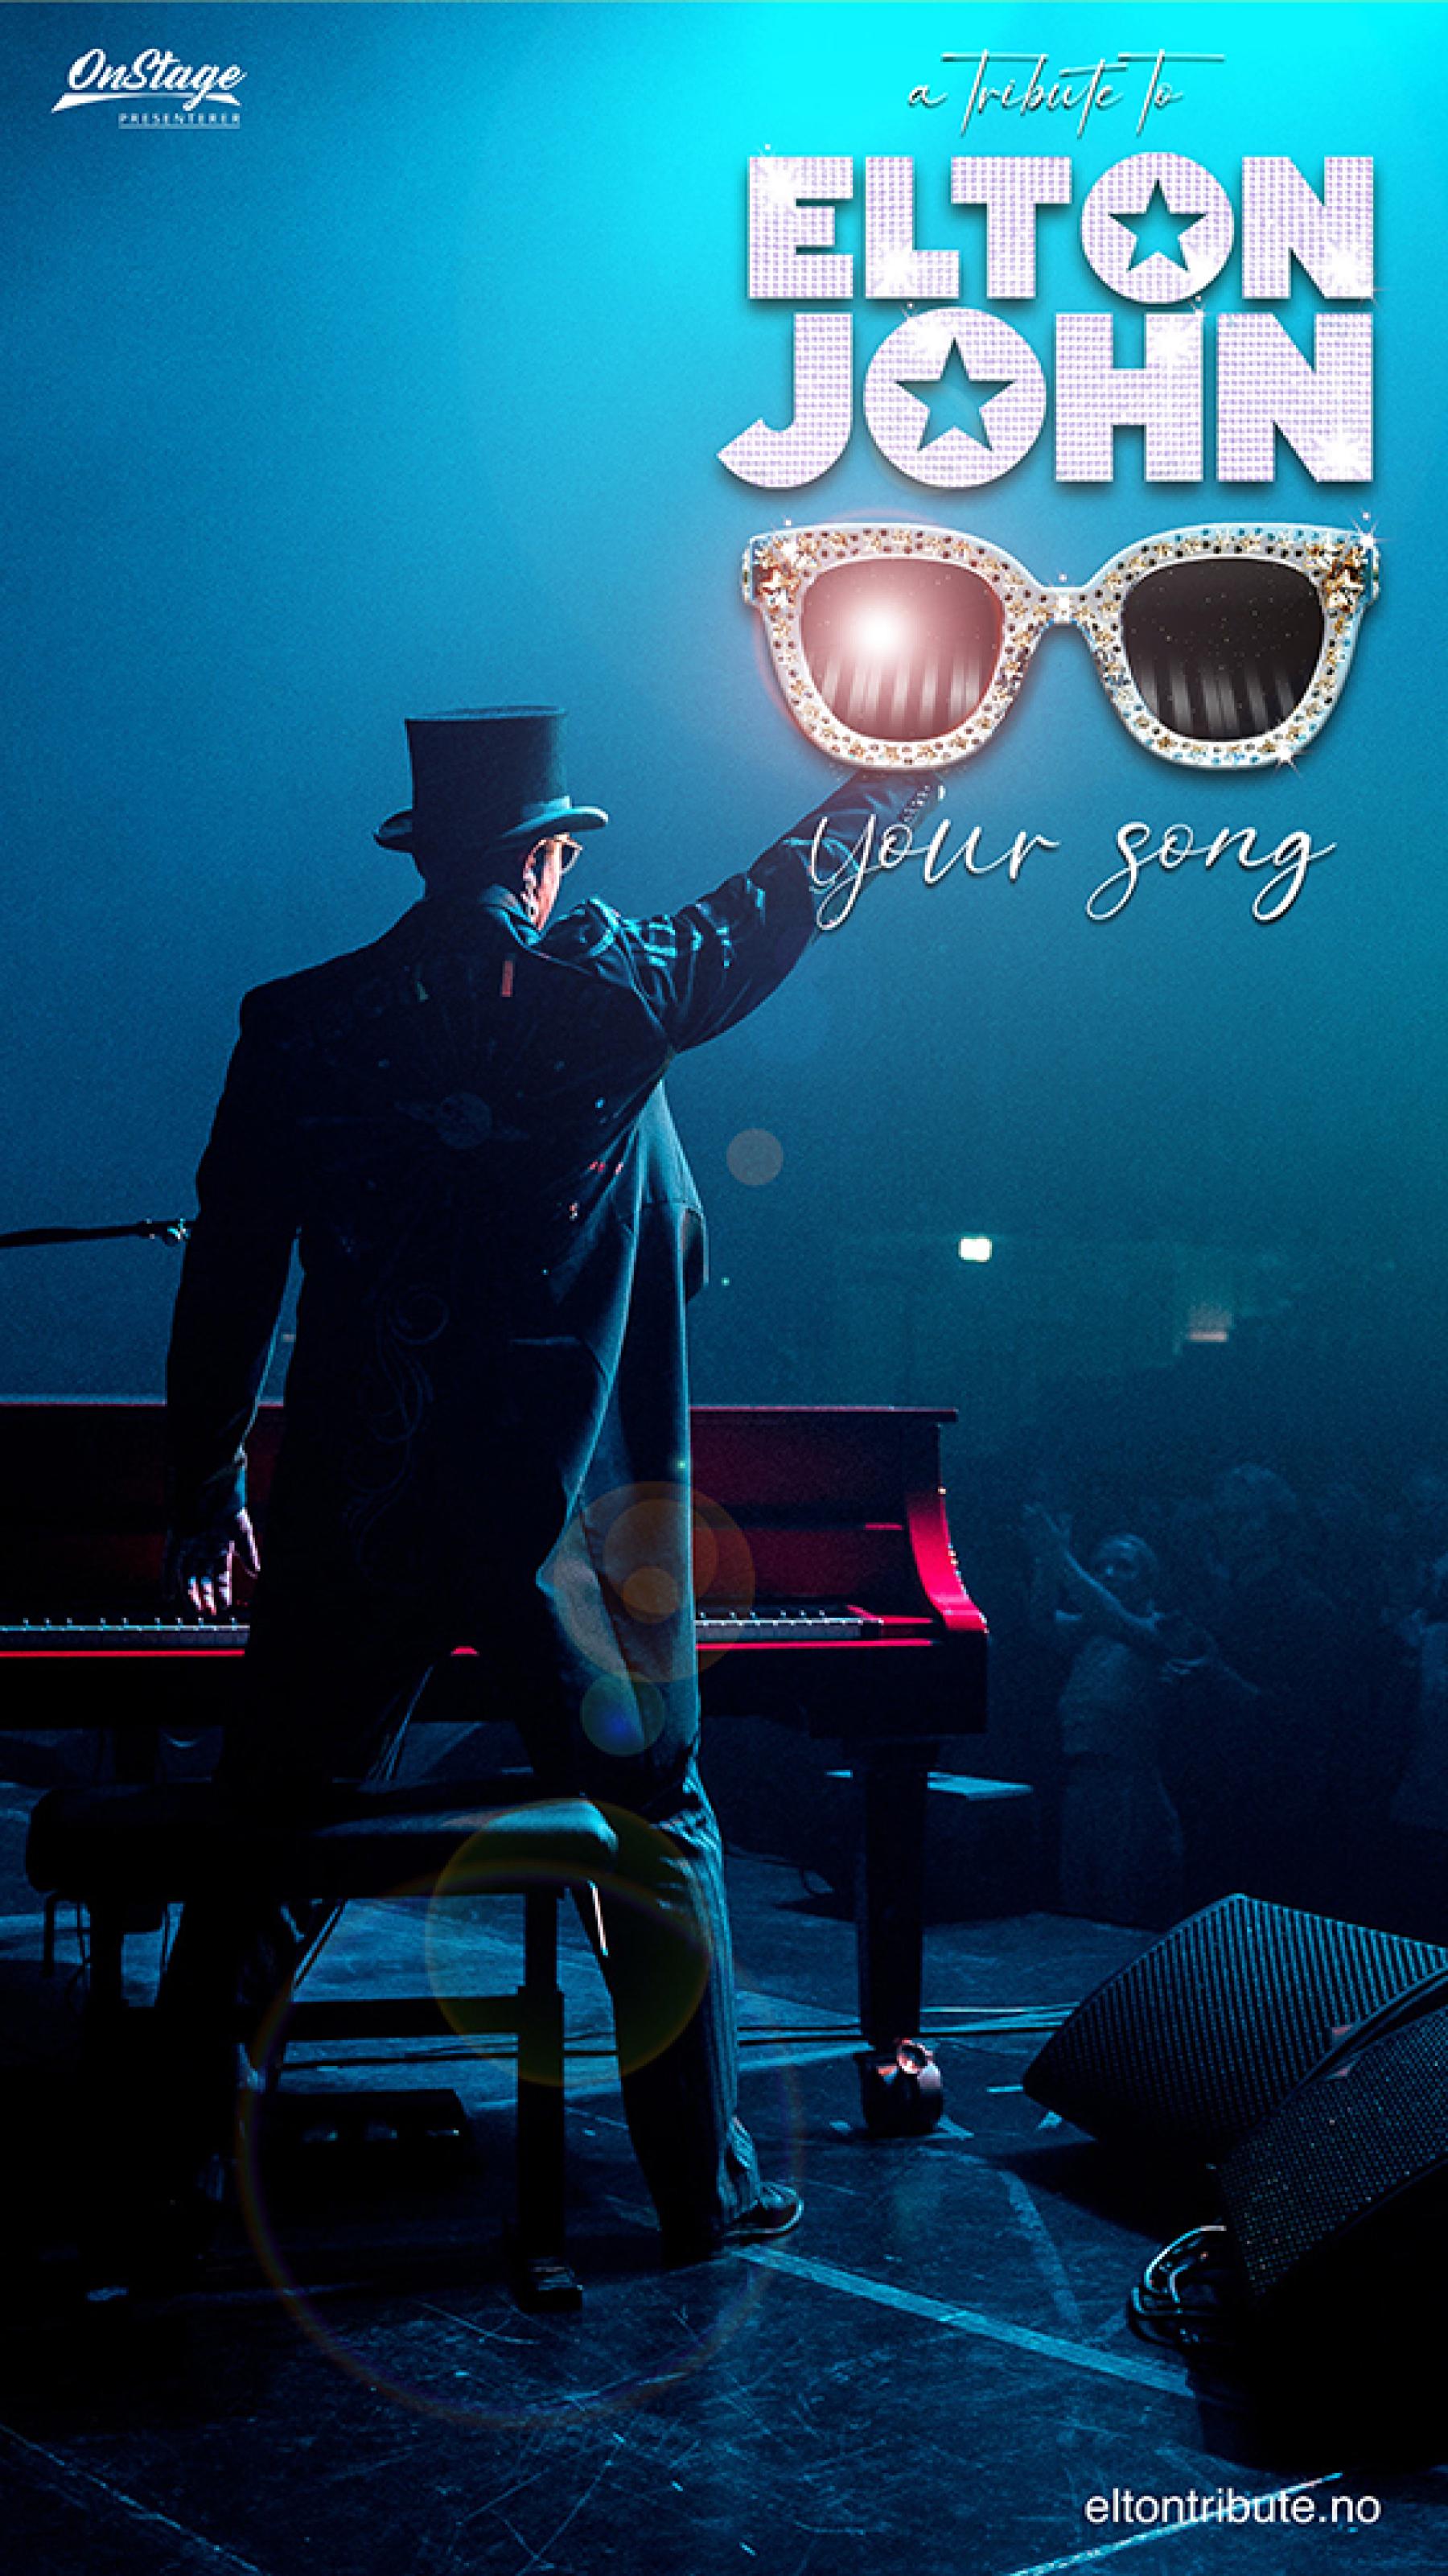 Your Song - a tribute to Elton John